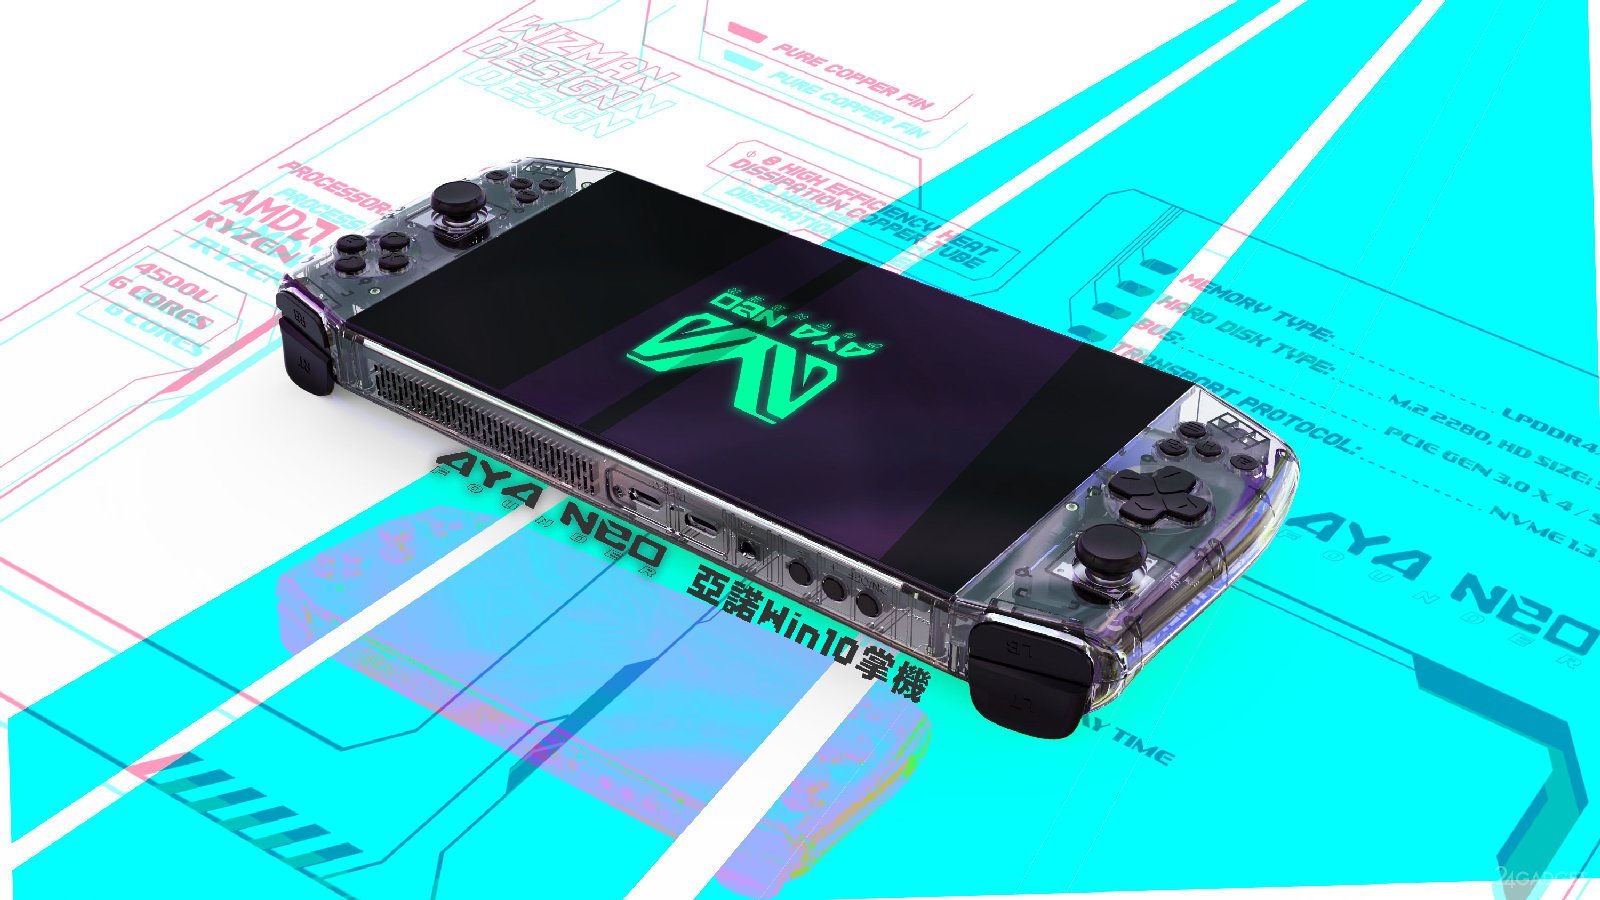 AYANEO Launches New Handheld Game Console With AMD Processor